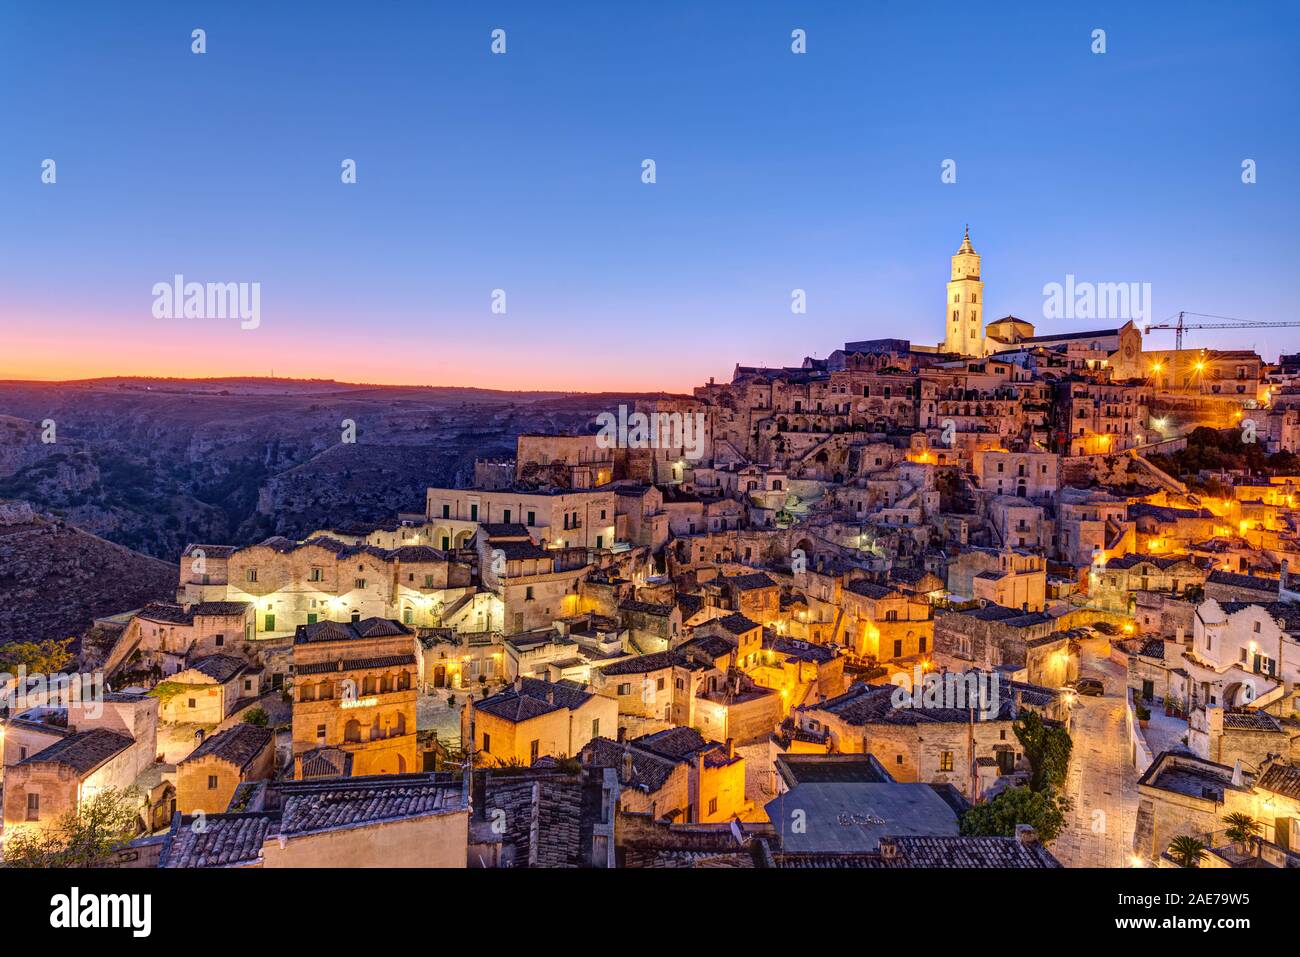 The old town of Matera in southern Italy before sunrise Stock Photo